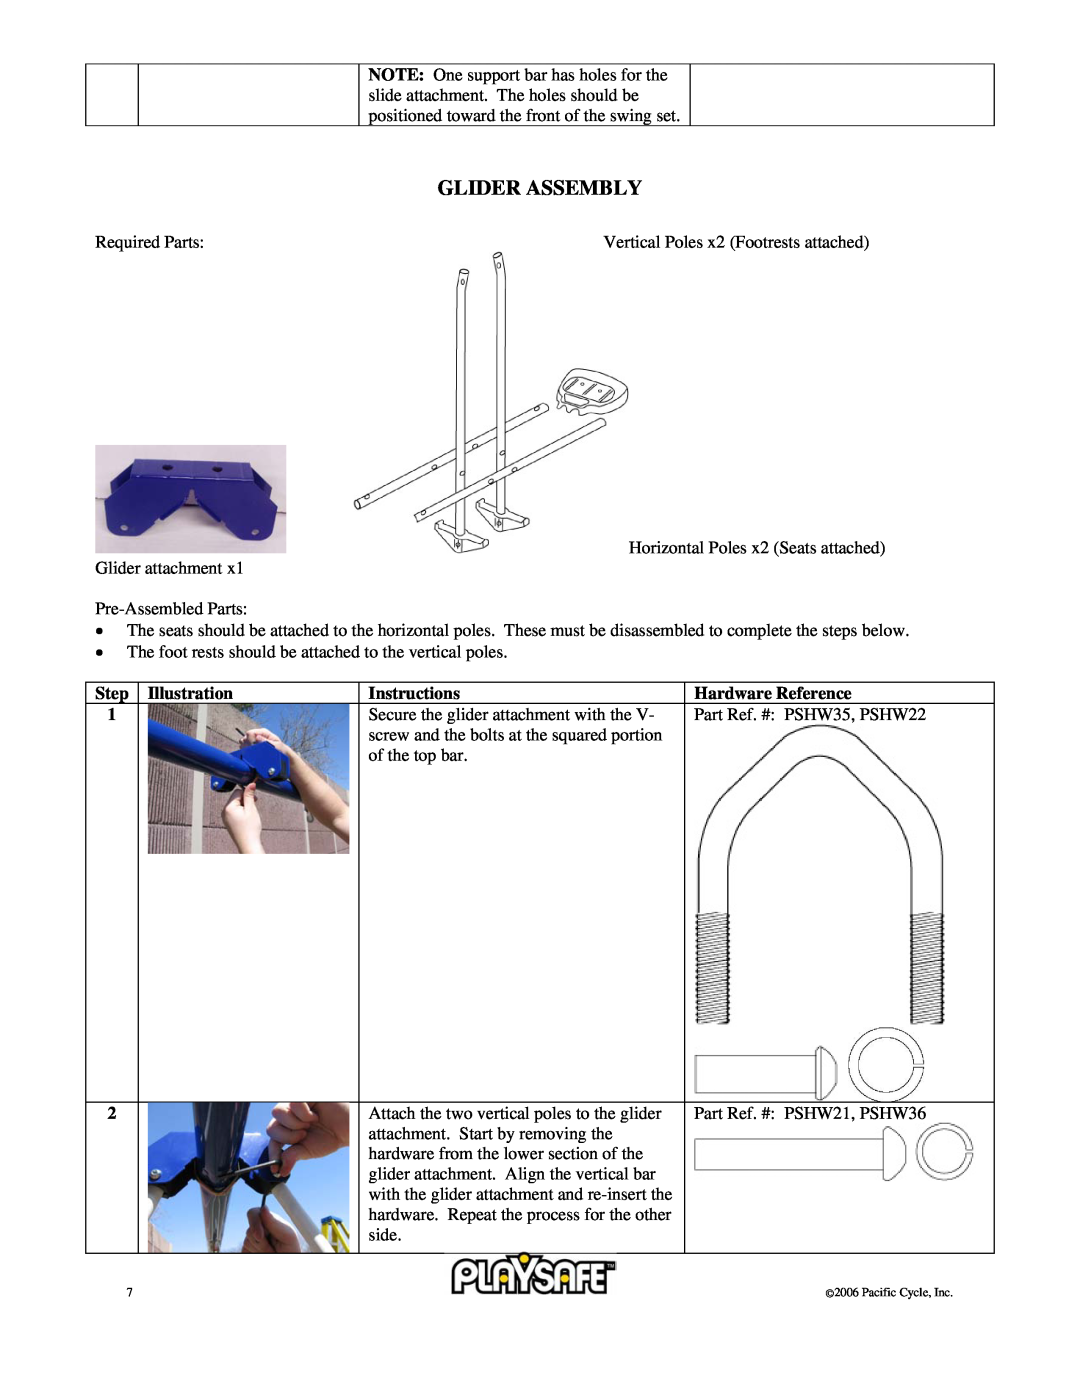 Pacific Cycle 22-PS245 owner manual Glider Assembly, Step Illustration, Instructions, Hardware Reference 